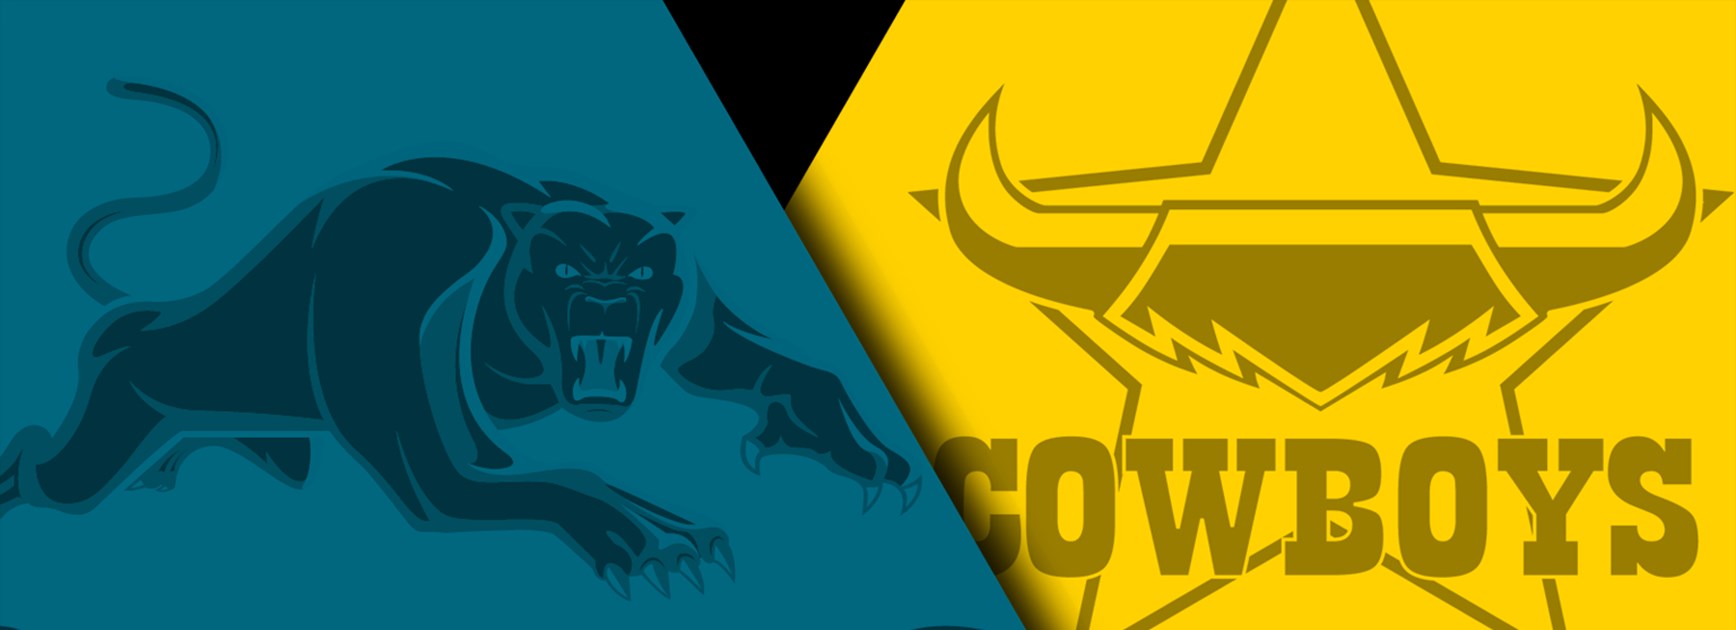 Penrith Panthers and North Queensland Cowboys face off in an NYC preliminary final.